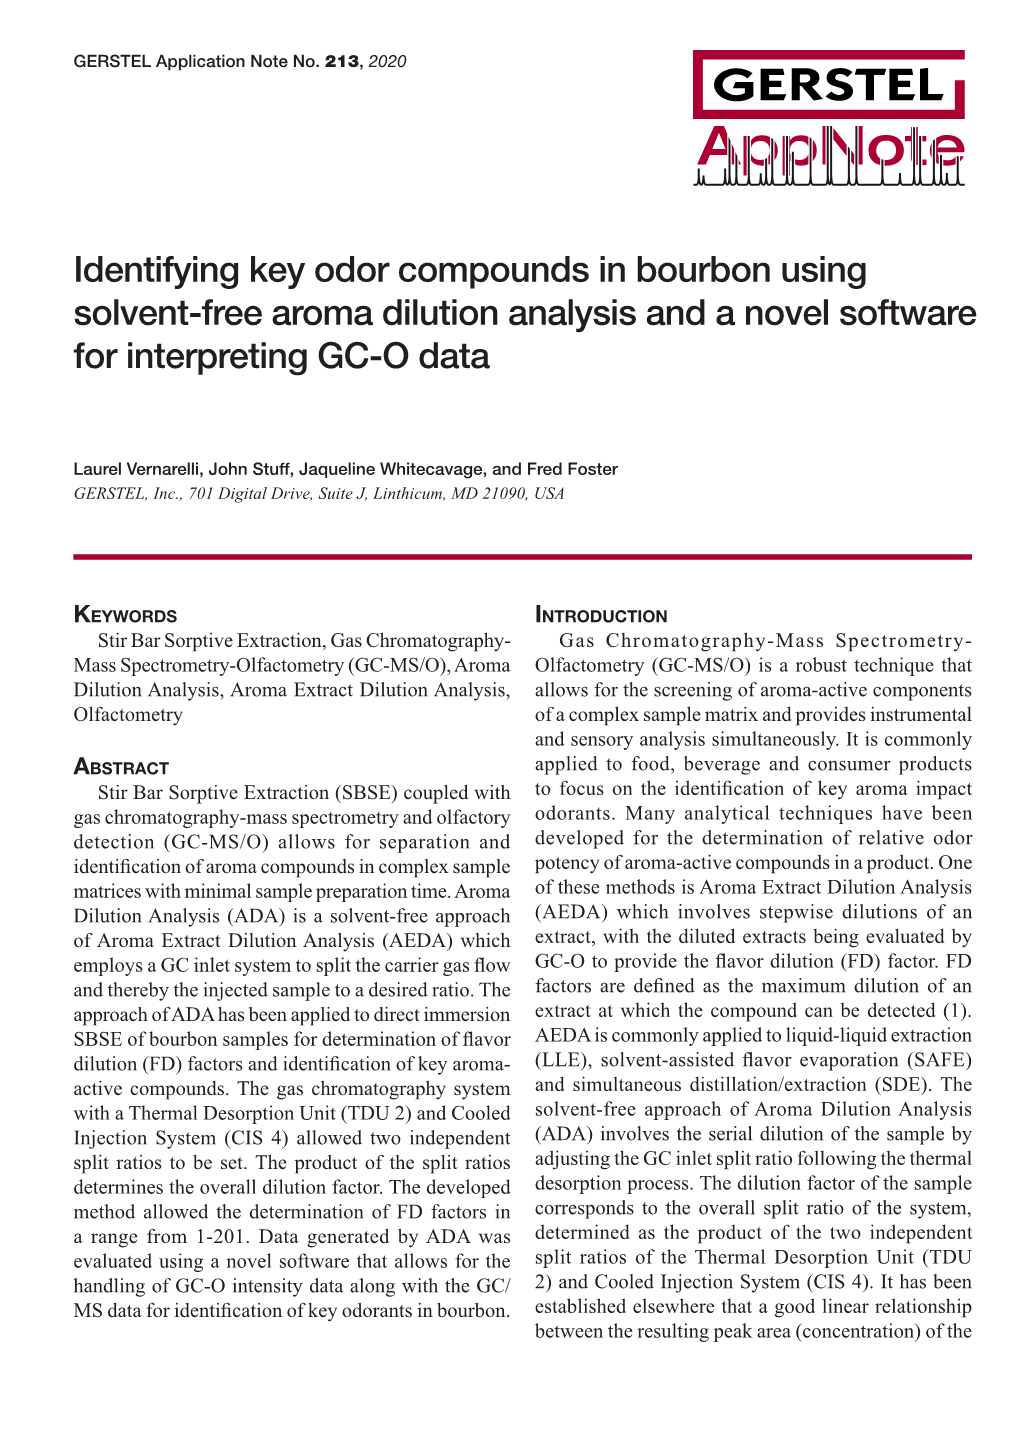 Identifying Key Odor Compounds in Bourbon Using Solvent-Free Aroma Dilution Analysis and a Novel Software for Interpreting GC-O Data